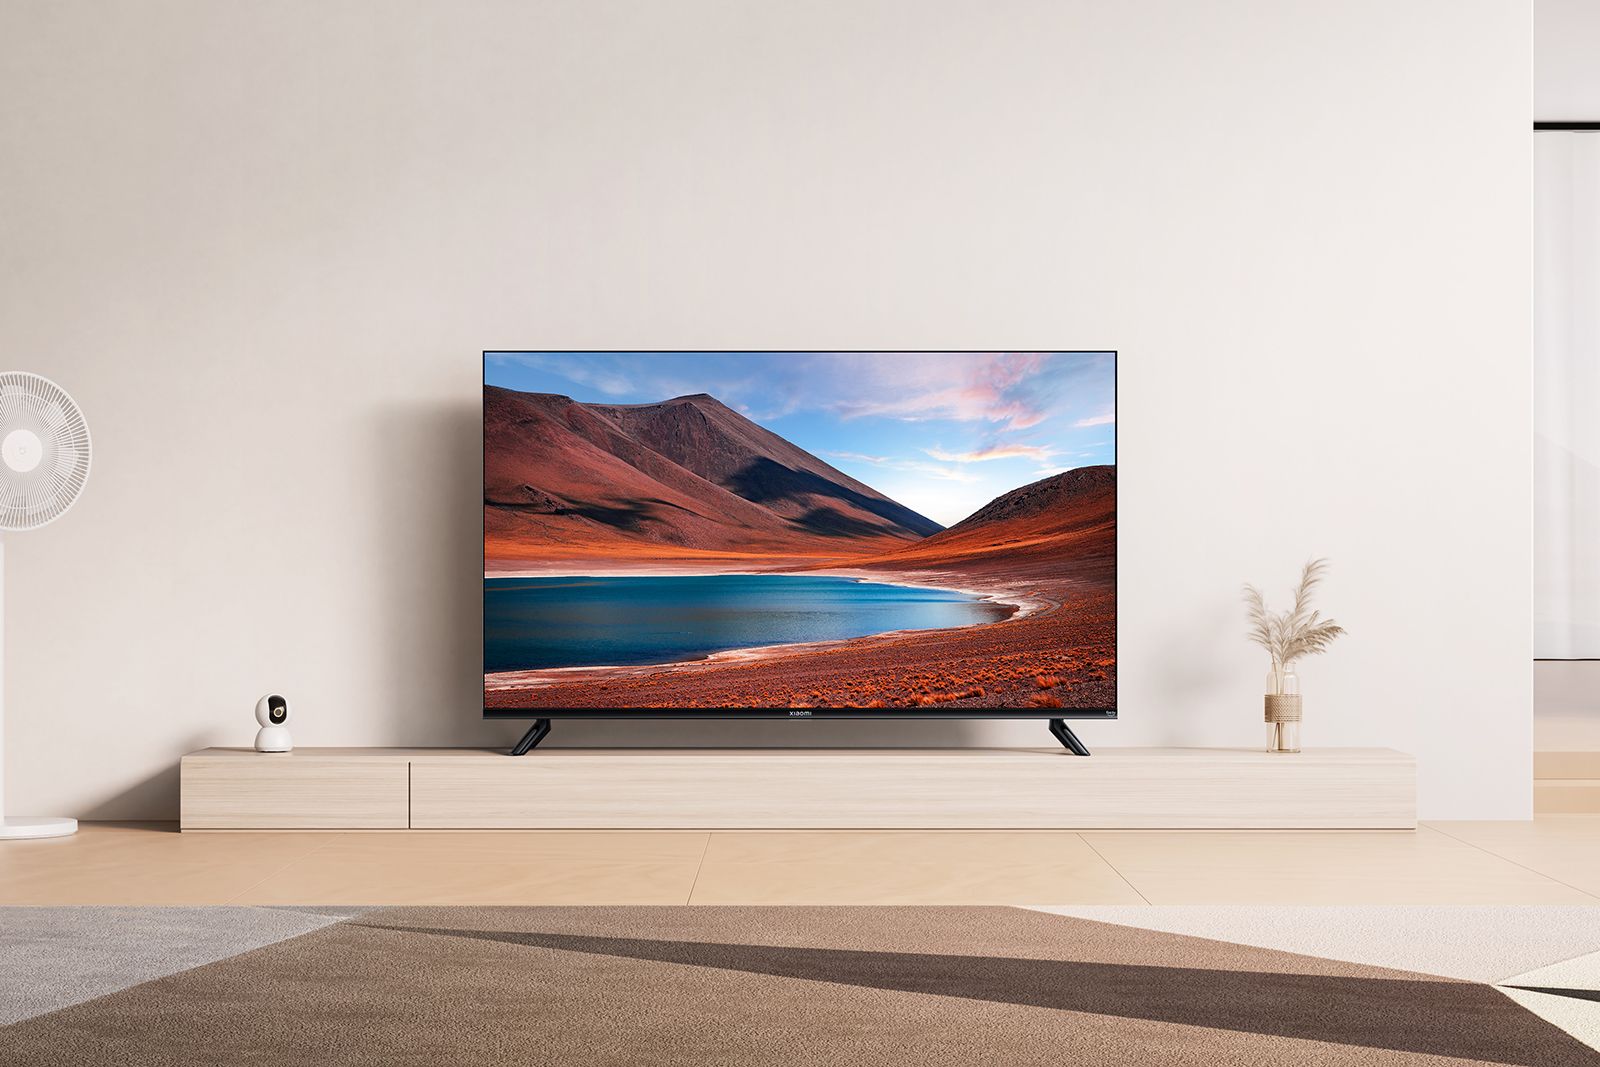 Xiaomi F2 series 4K HDR TVs available with Amazon Fire TV built in photo 1